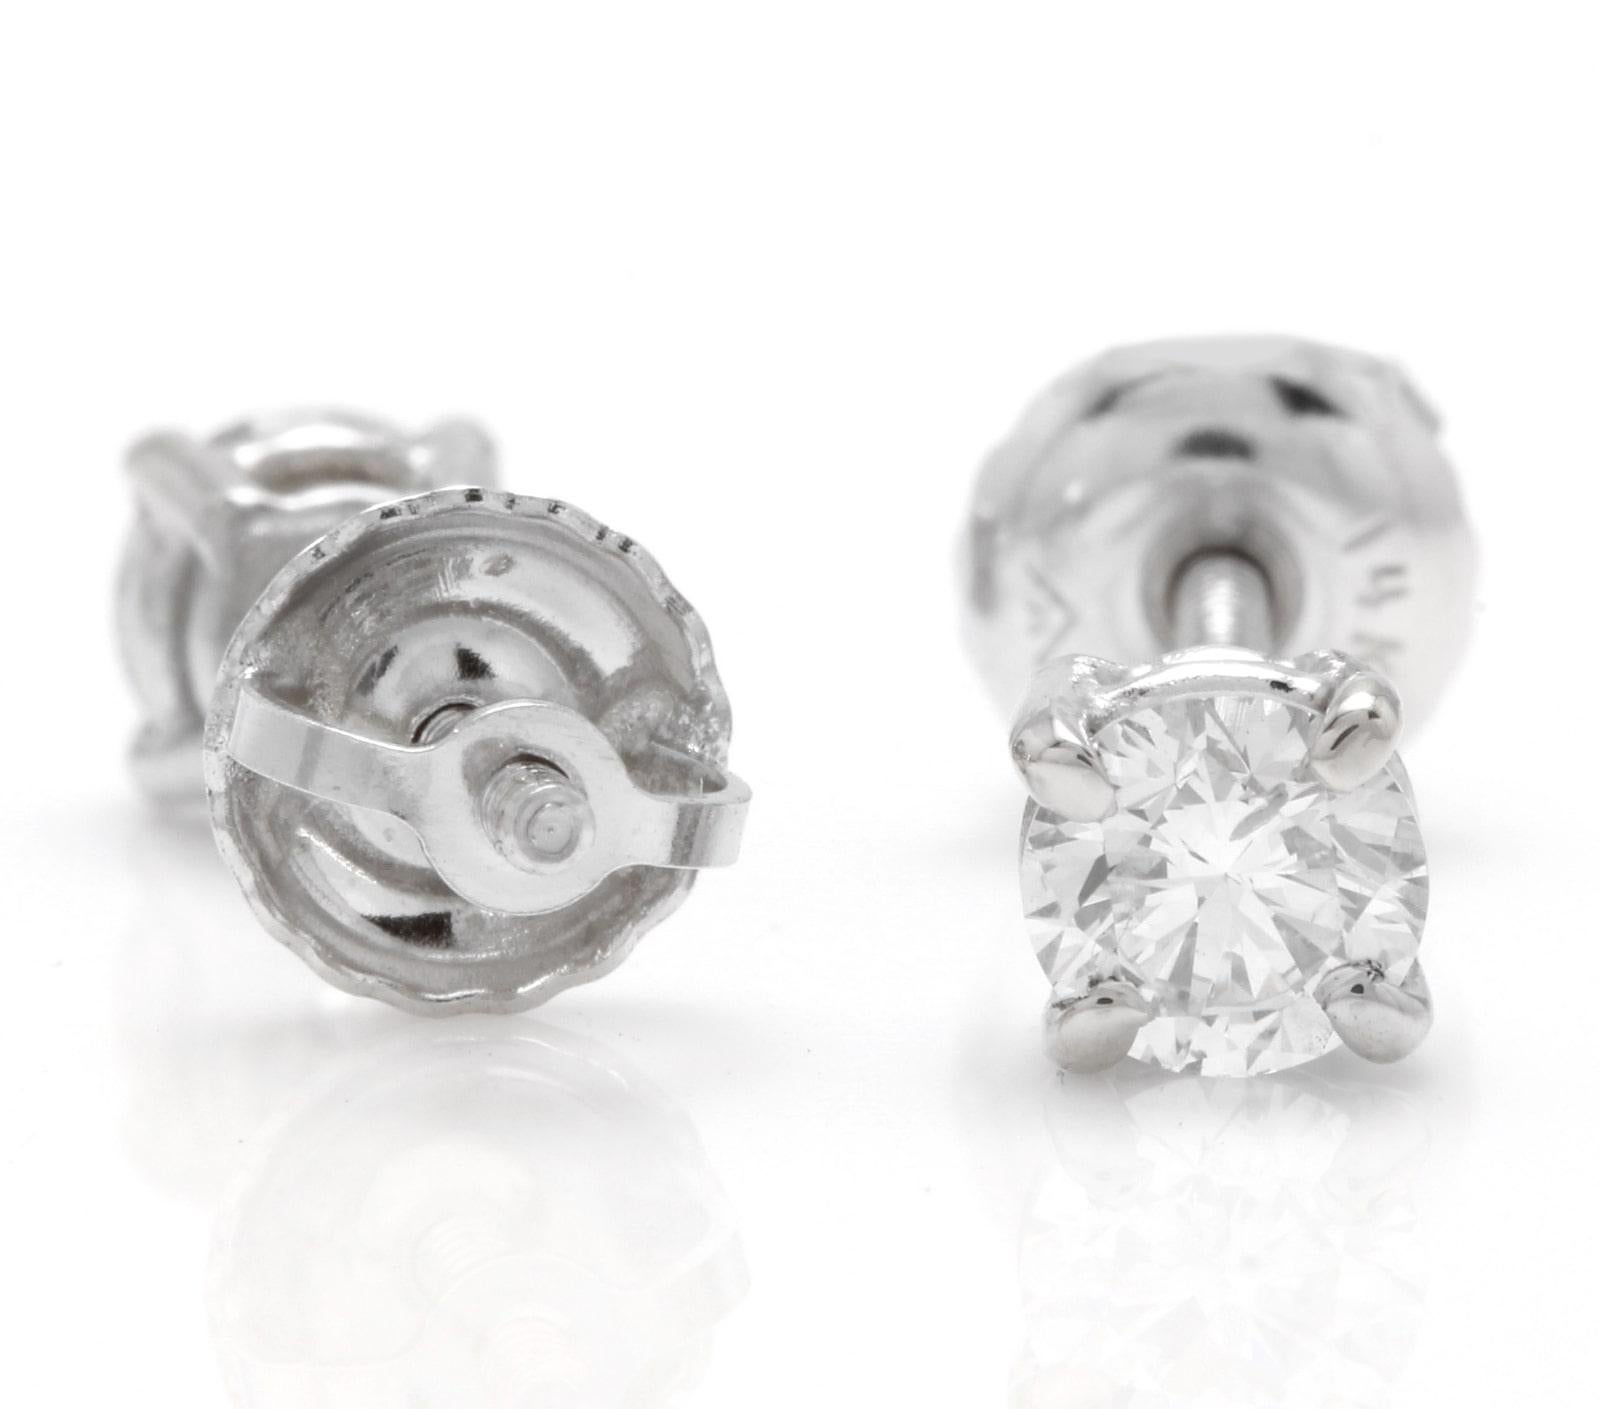 Exquisite 0.50 Carats Natural Diamond 14K Solid White Gold Stud Earrings

Amazing looking piece!

Total Natural Round Cut Diamonds Weight: 1.00 Carats (both earrings) VS2-S1 / G

Diamond Measures: Approx. 4.00mm

Total Earrings Weight is: 1.2